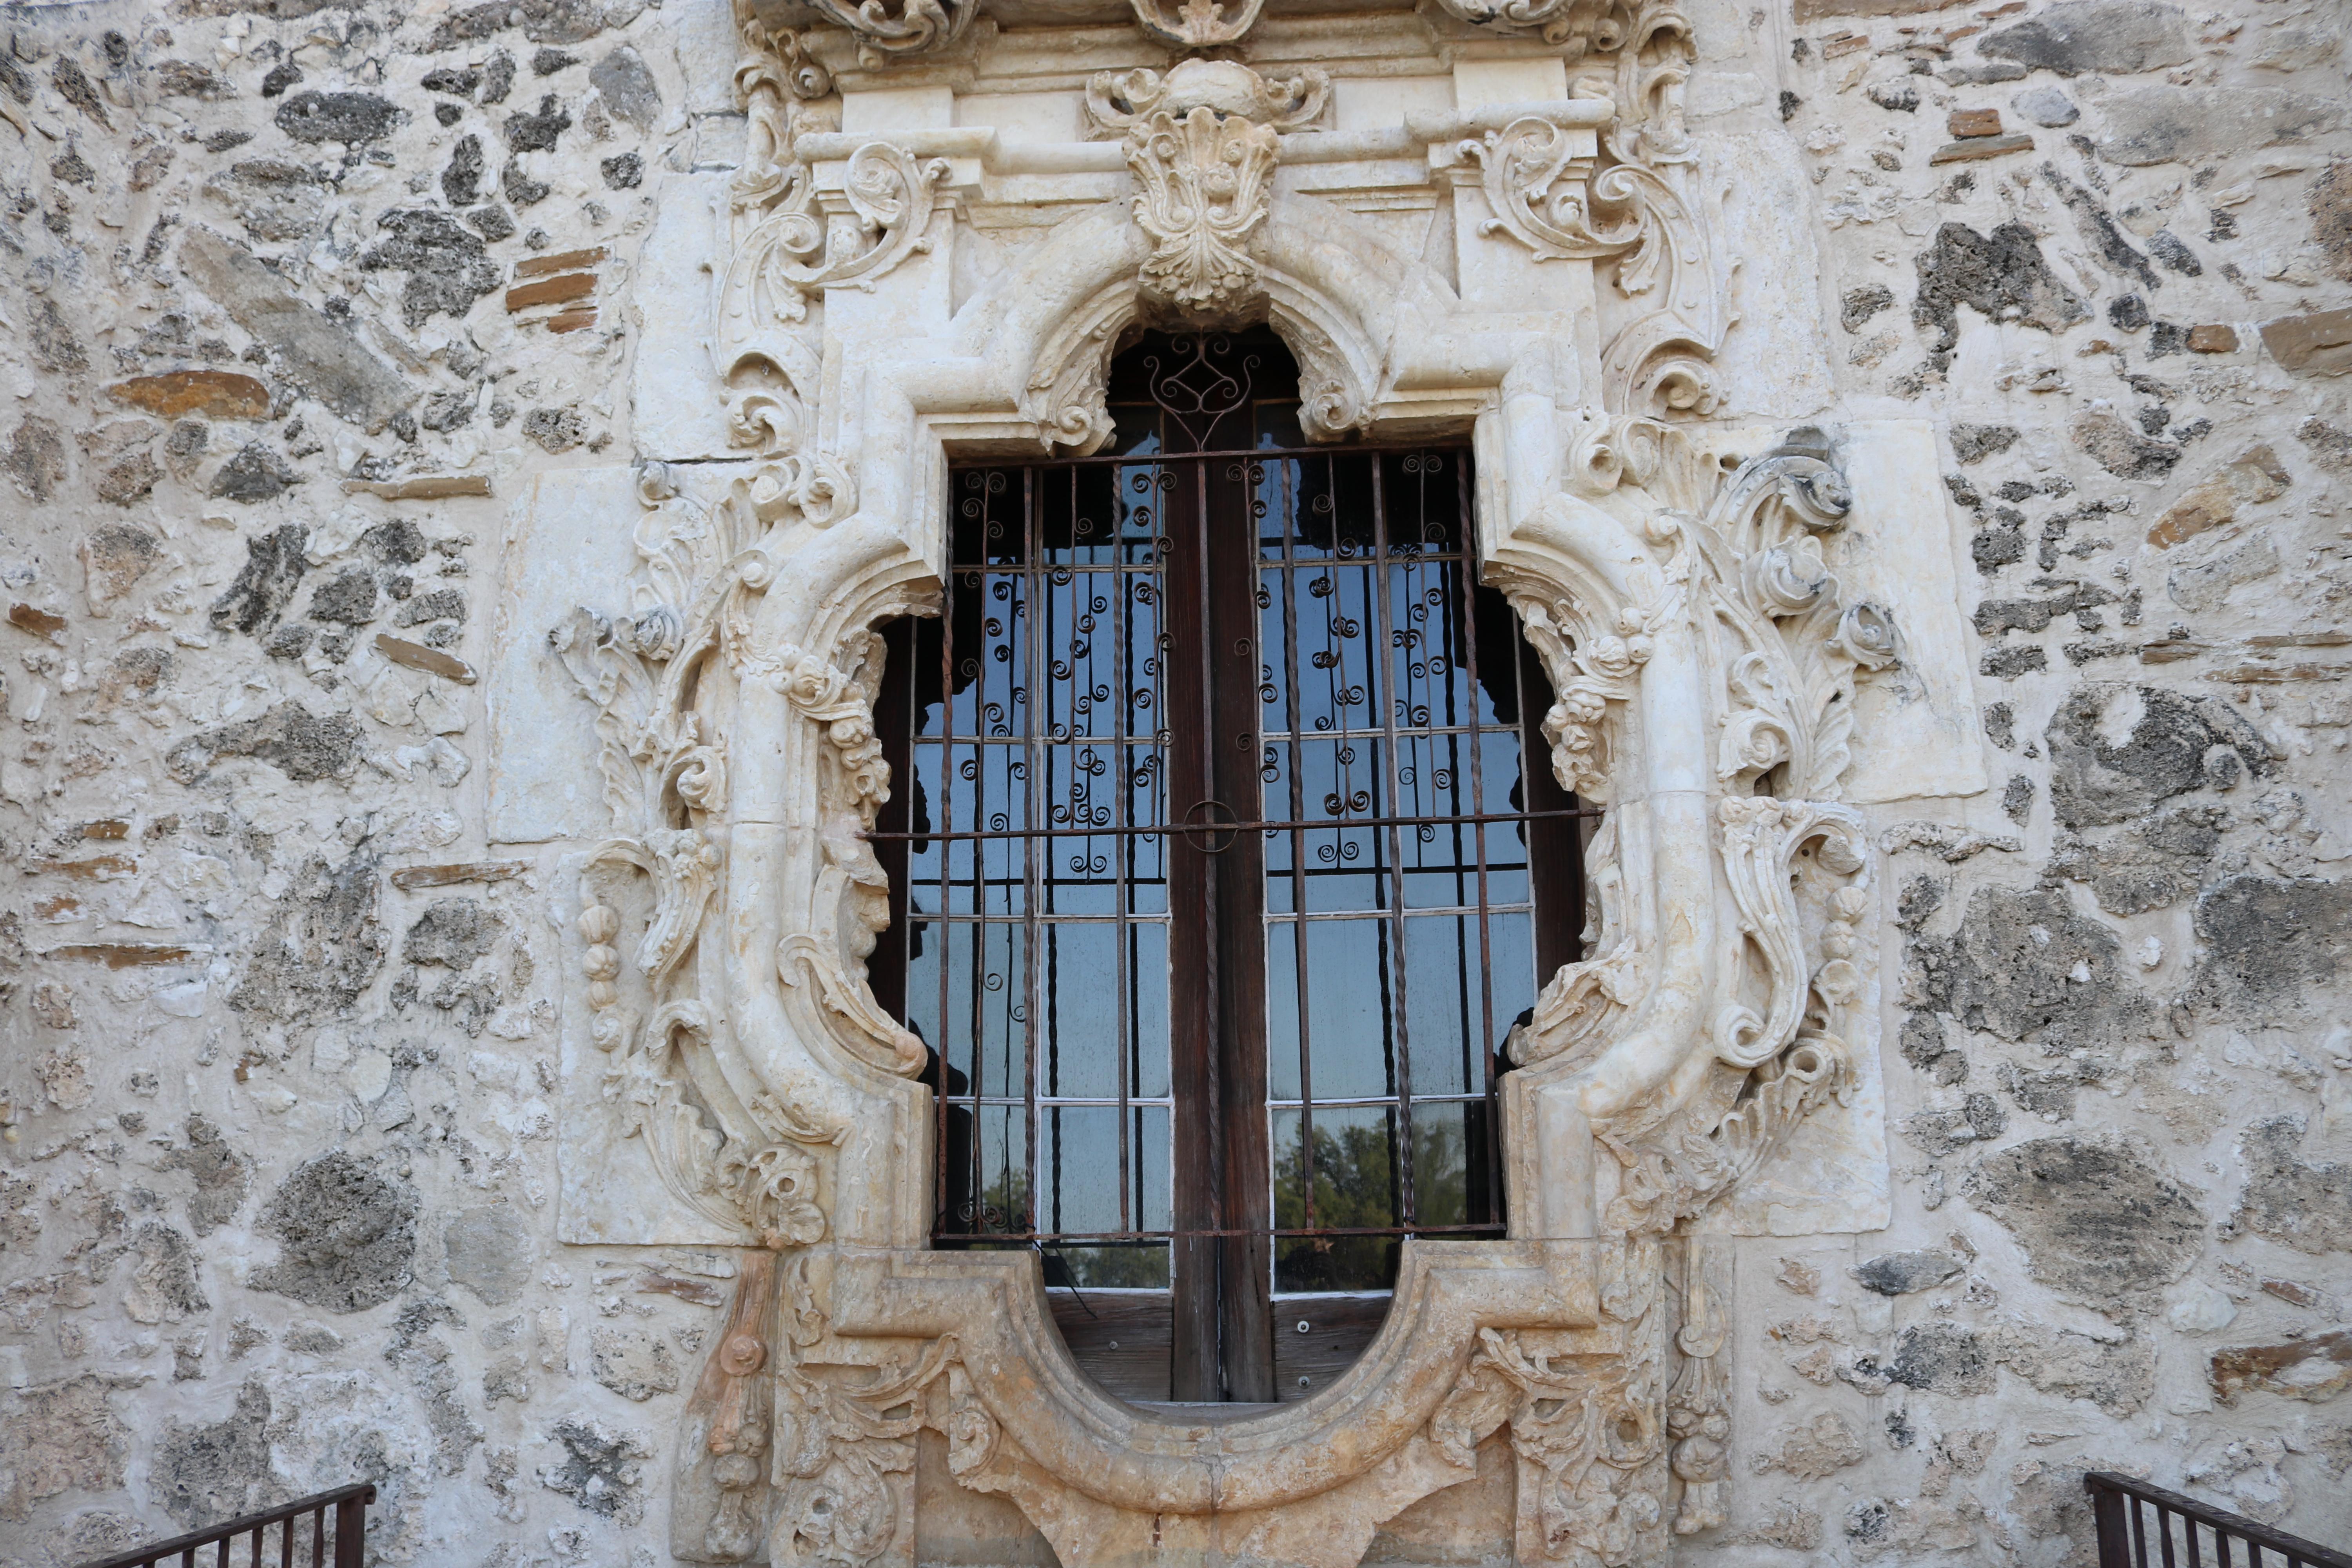 Rose window at mission San Jose, with linestone carvings surrounding a small glass window.